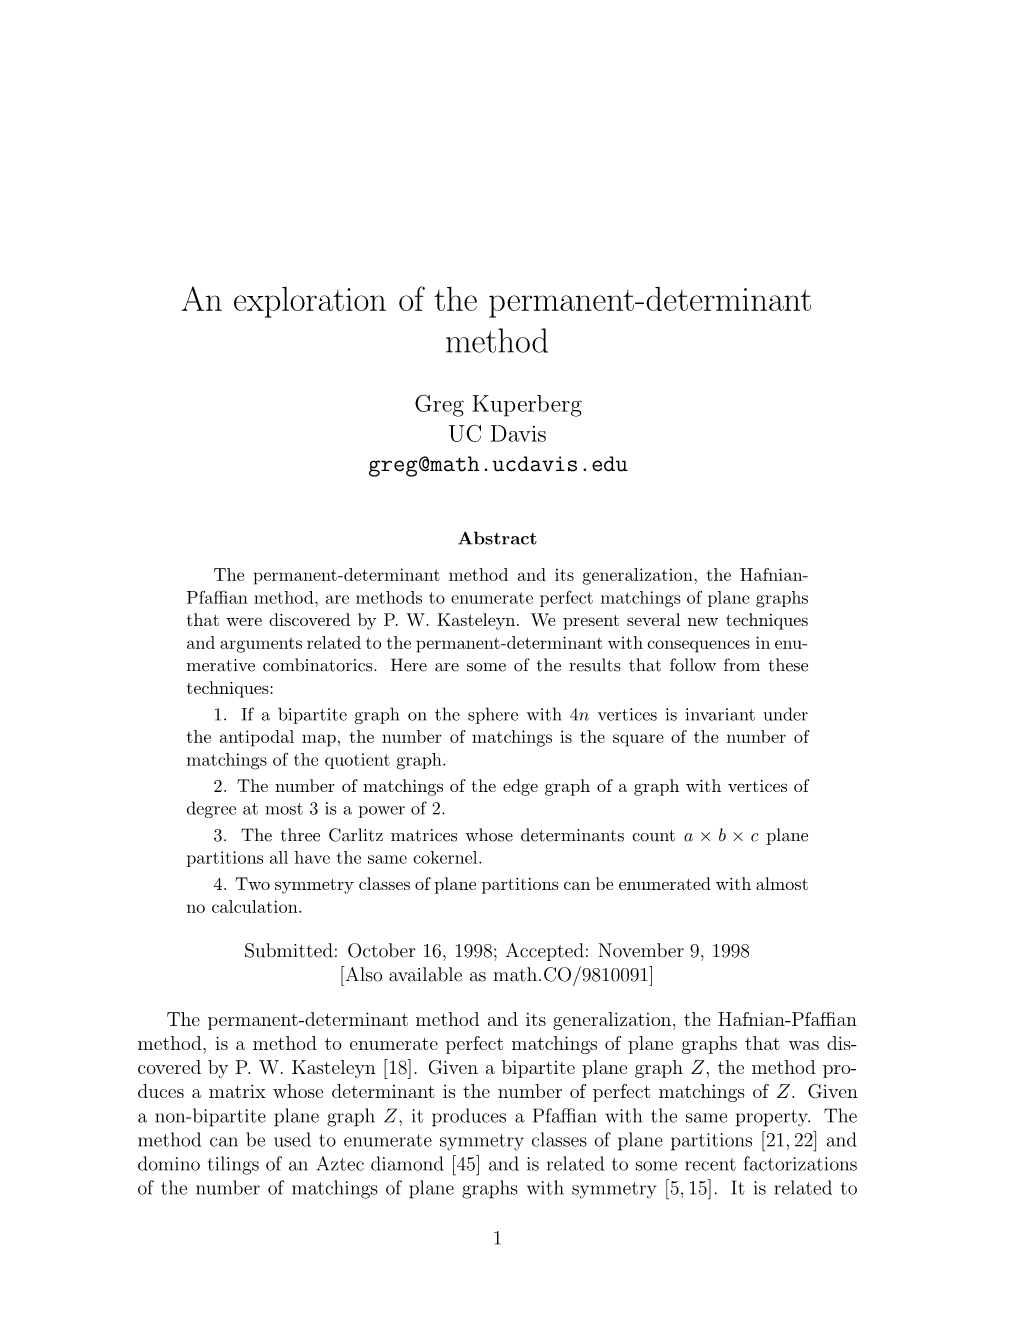 An Exploration of the Permanent-Determinant Method